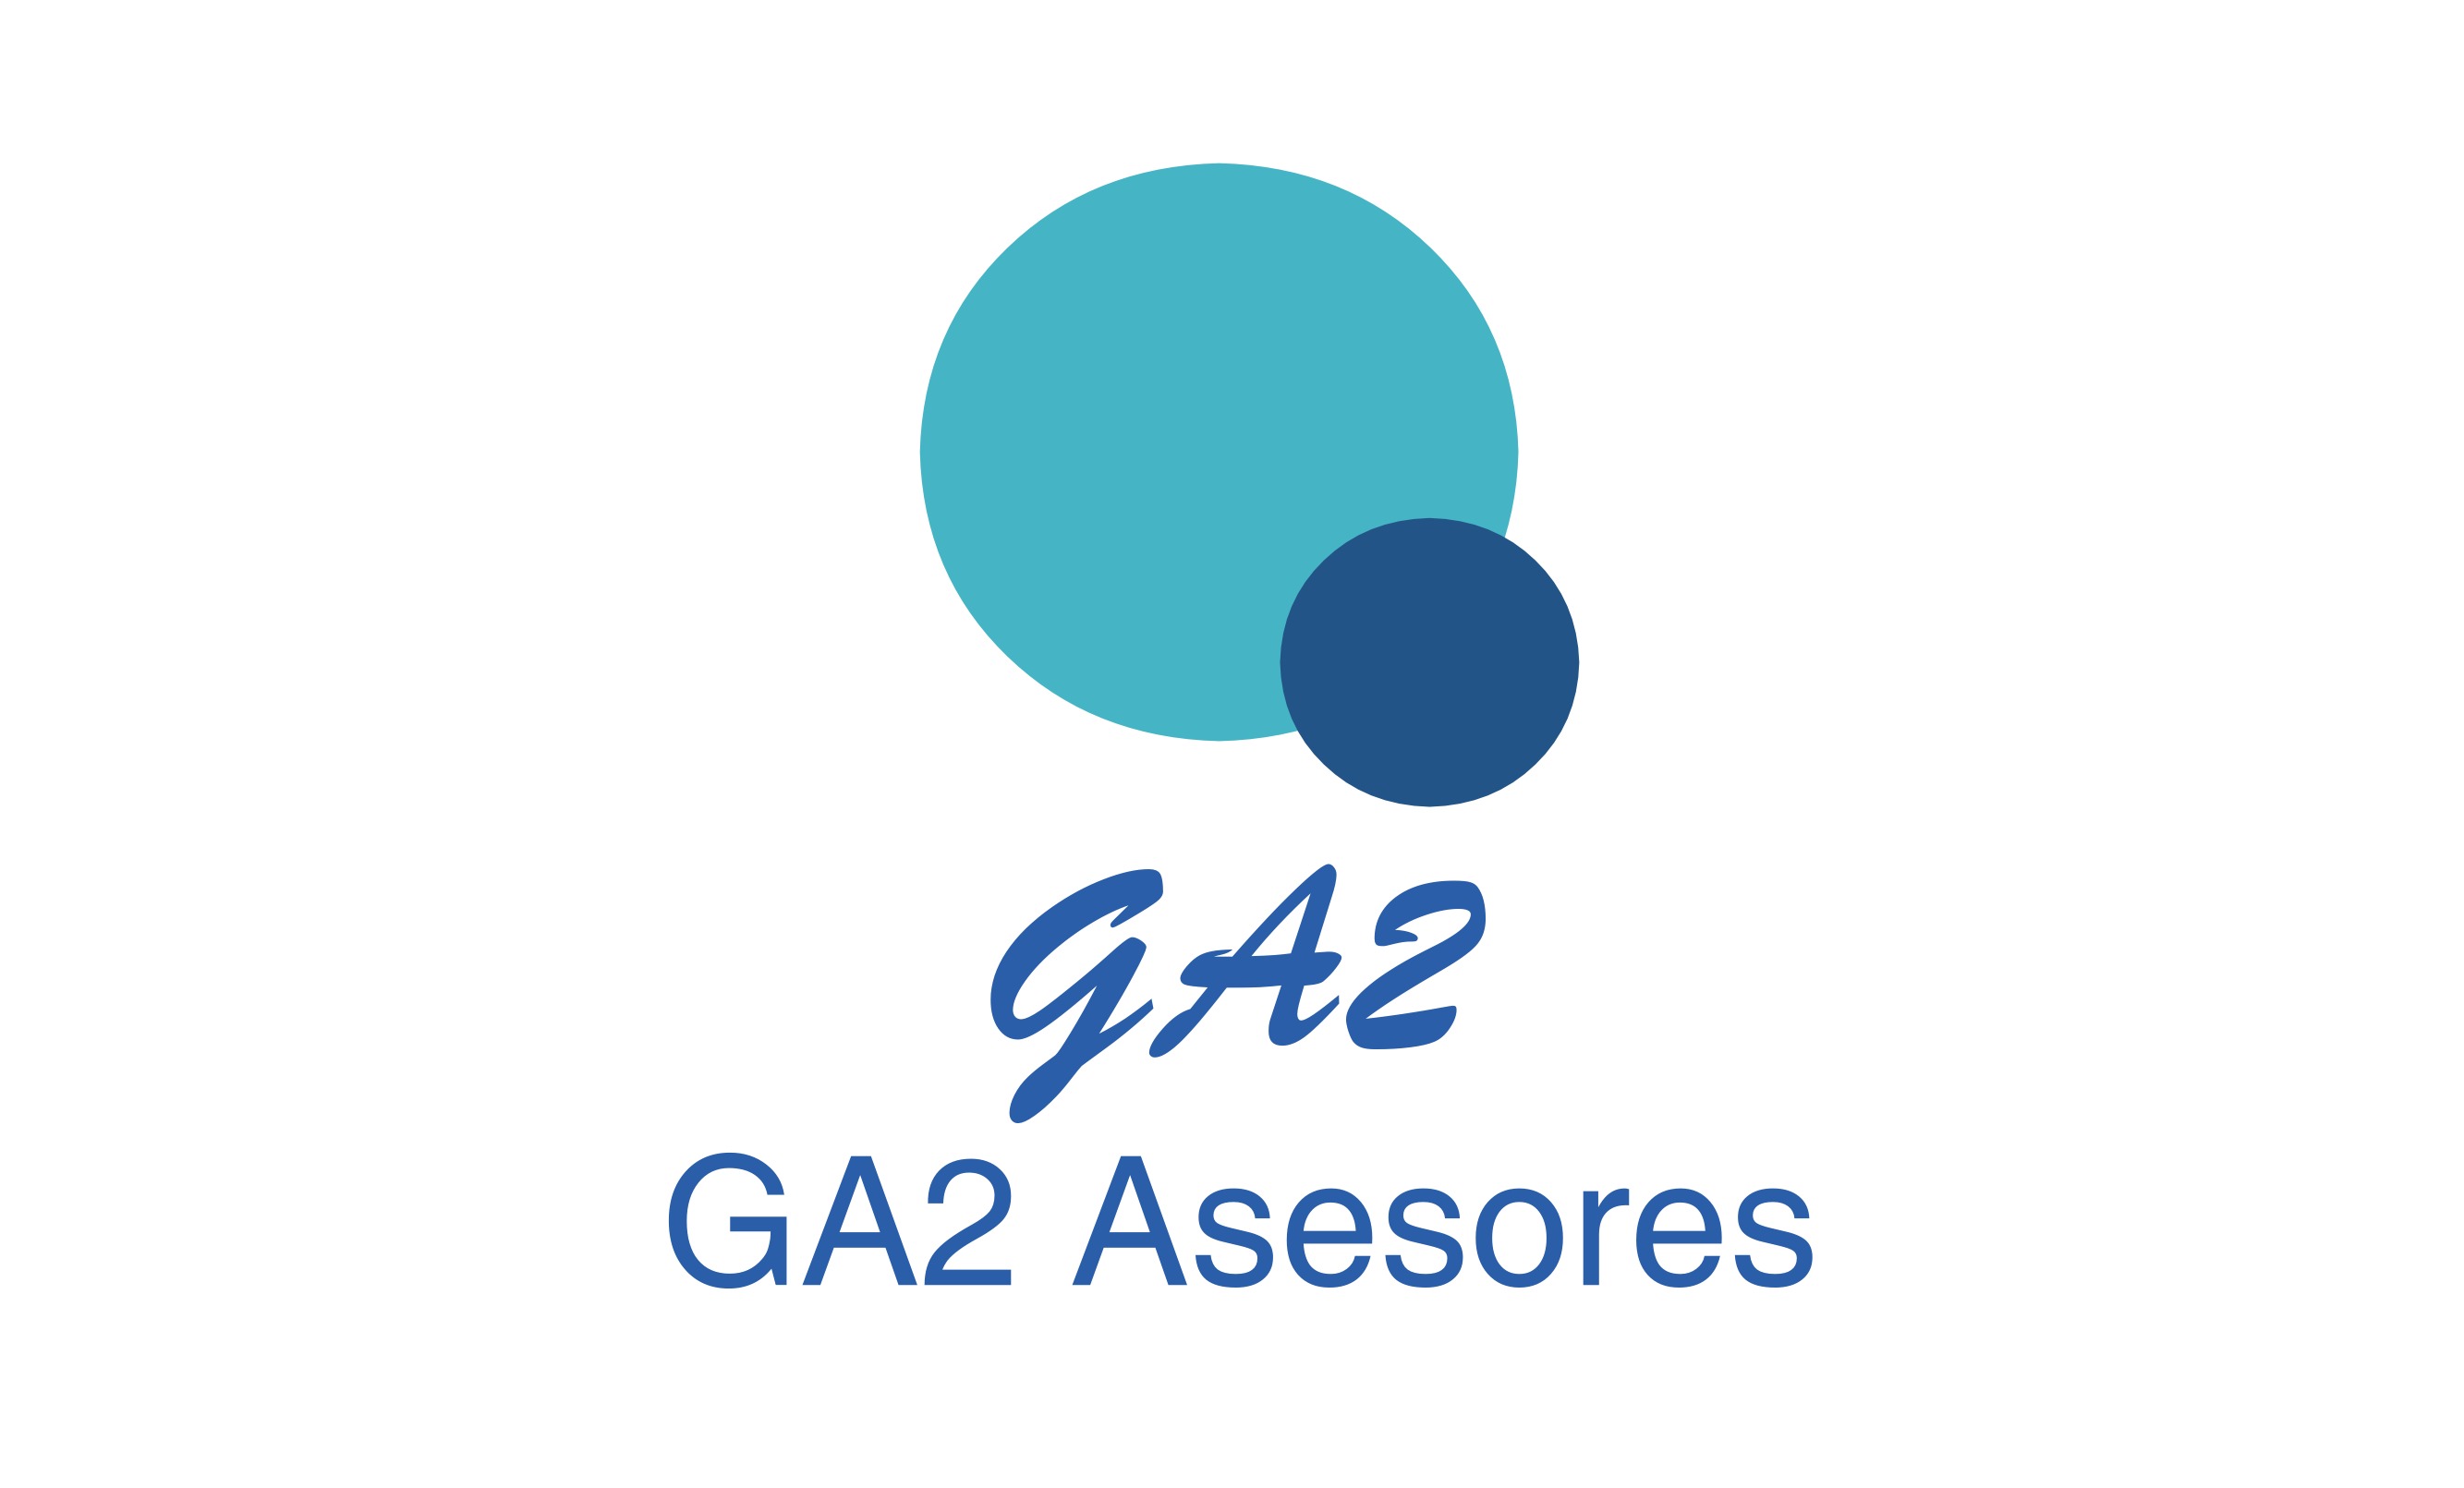 Images GA2 Asesores